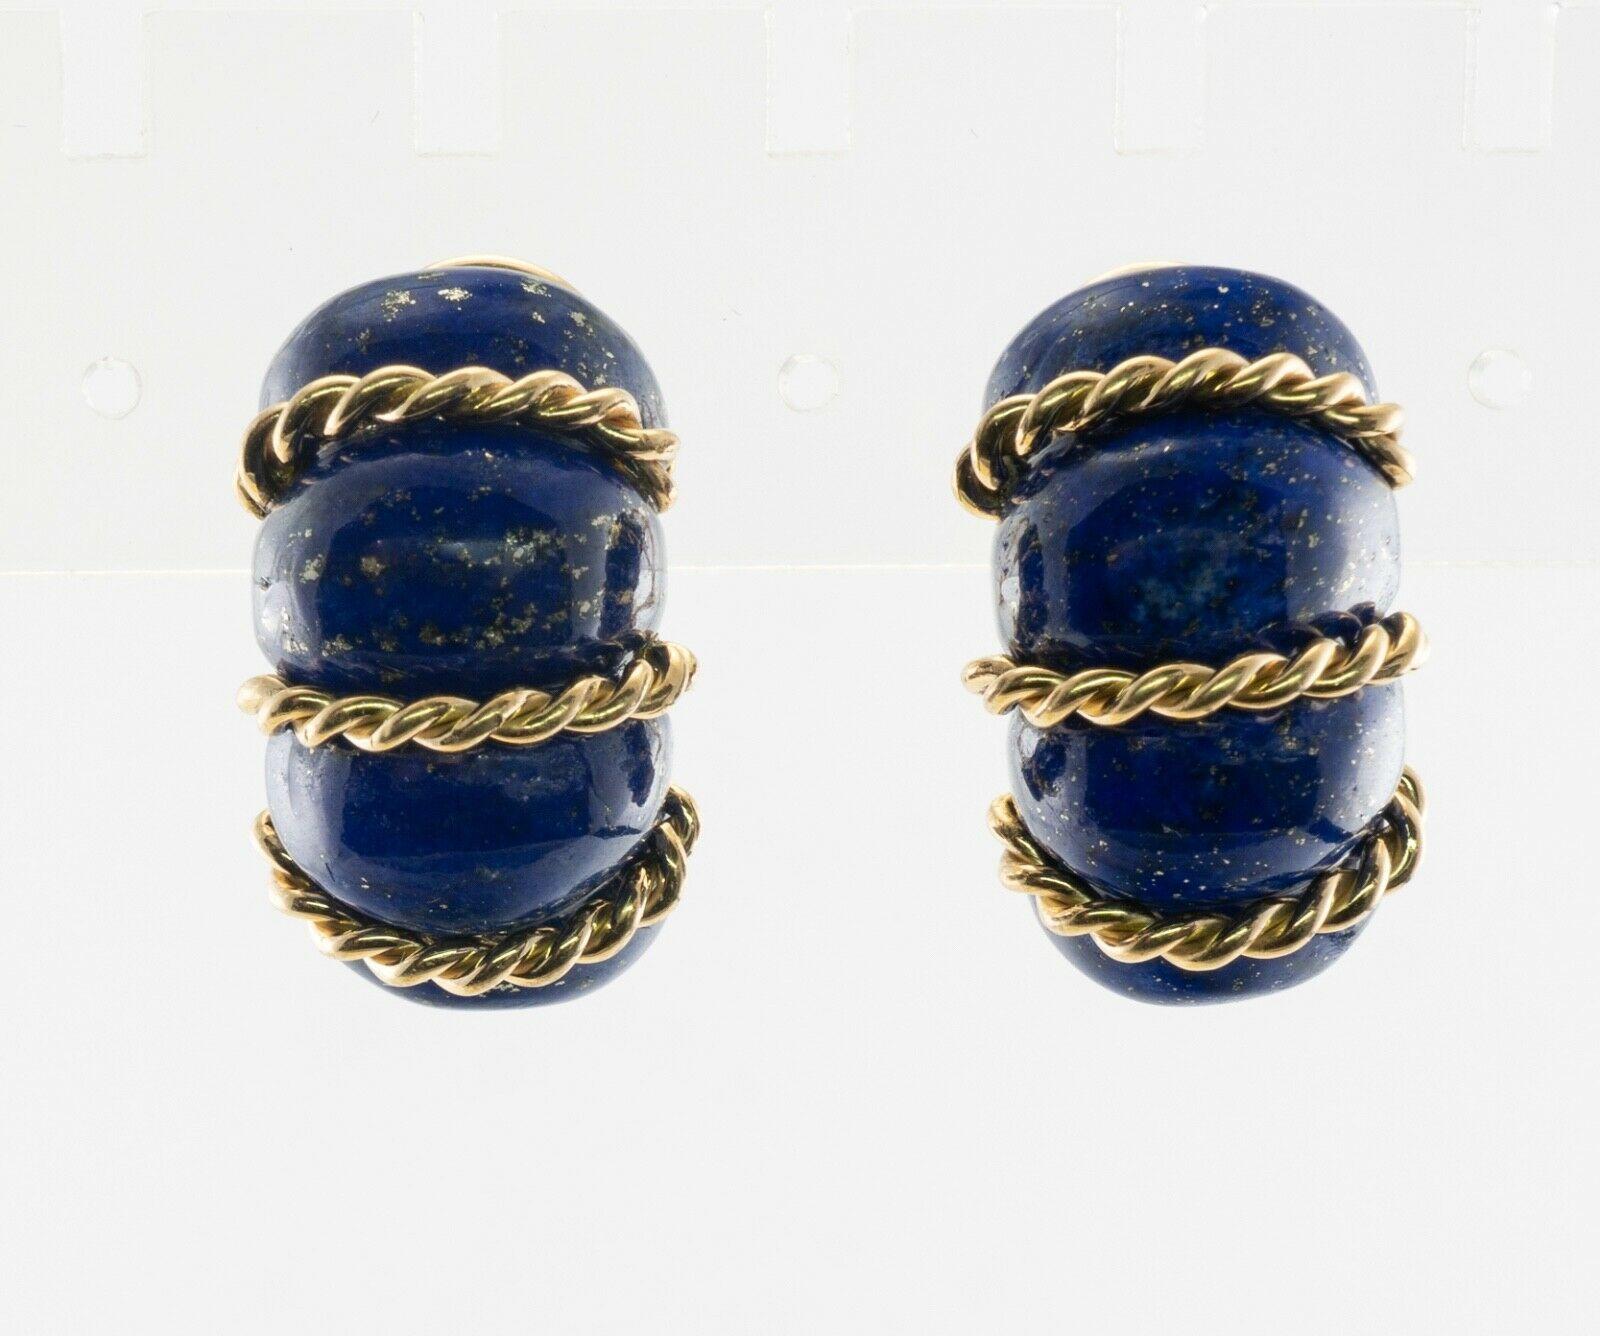 A sophisticated take on a classic hoop design, compliments of iconic American jeweler Seaman Schepps. Sensuously styled sections of lapis lazuli alternate with a twisted rope design, symbiotically creating a sculpture that resembles a shrimp. They